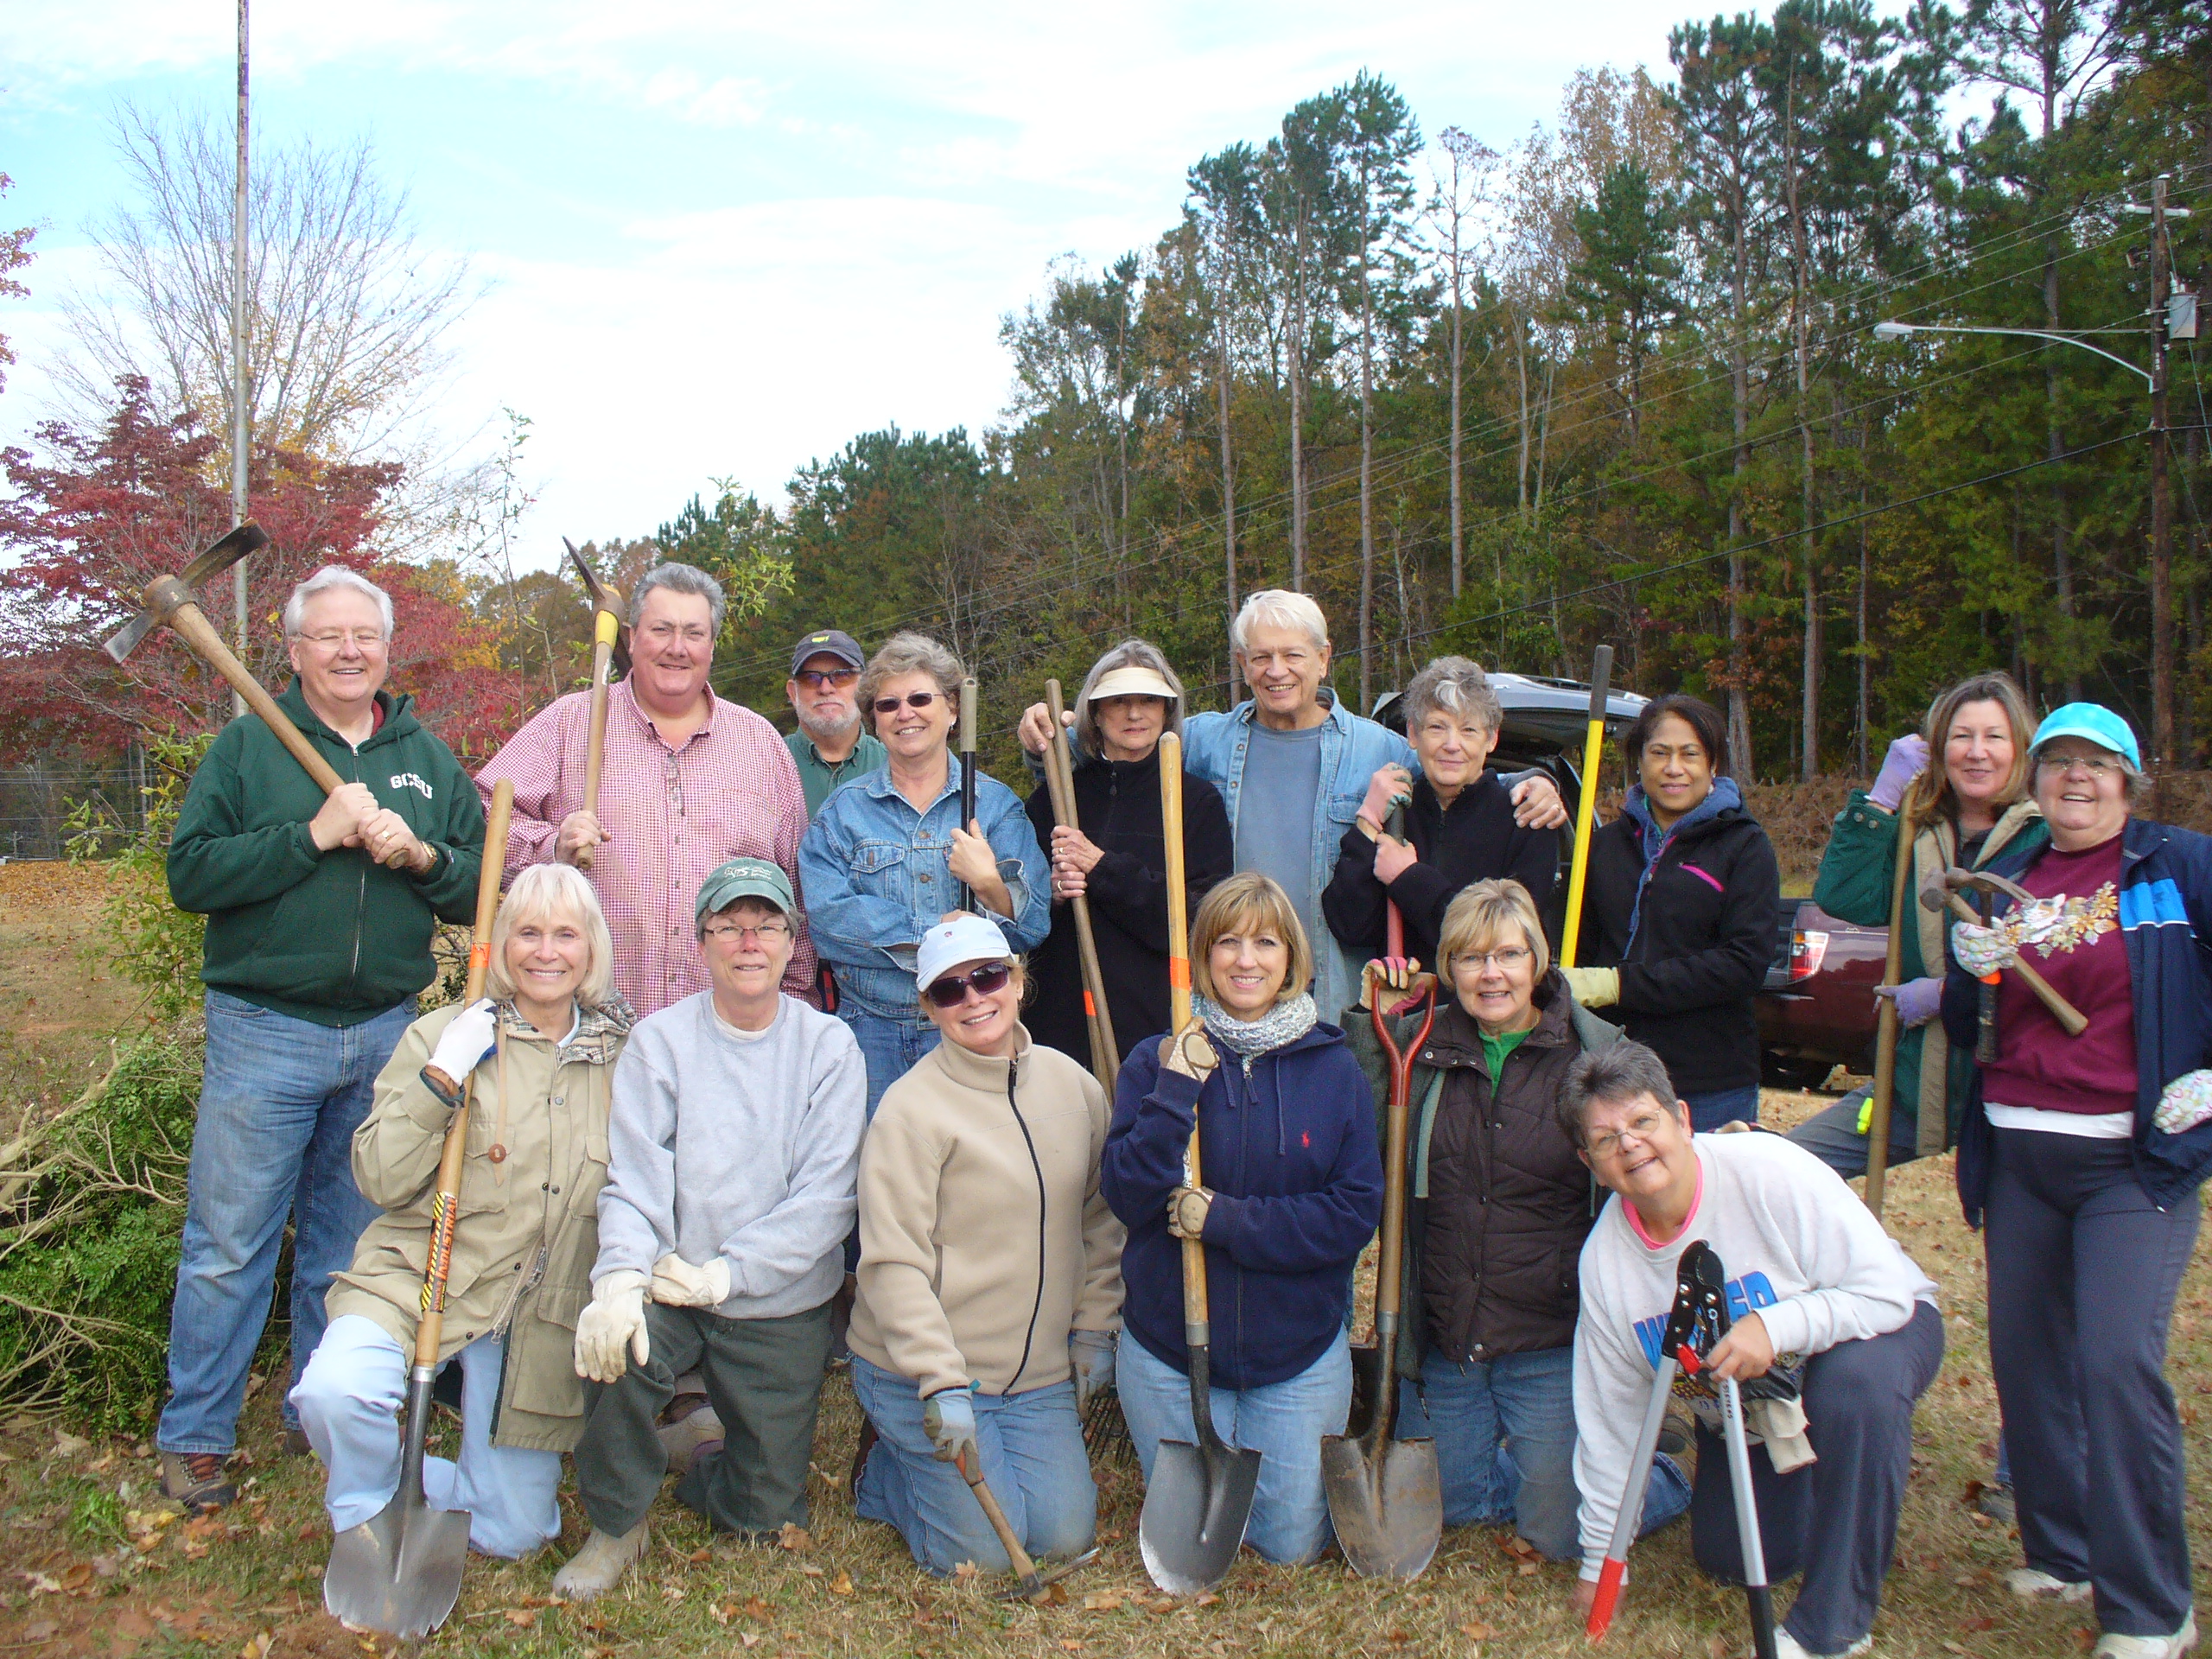 Group photo of Master Gardener volunteers holding shovels and other gardening tools